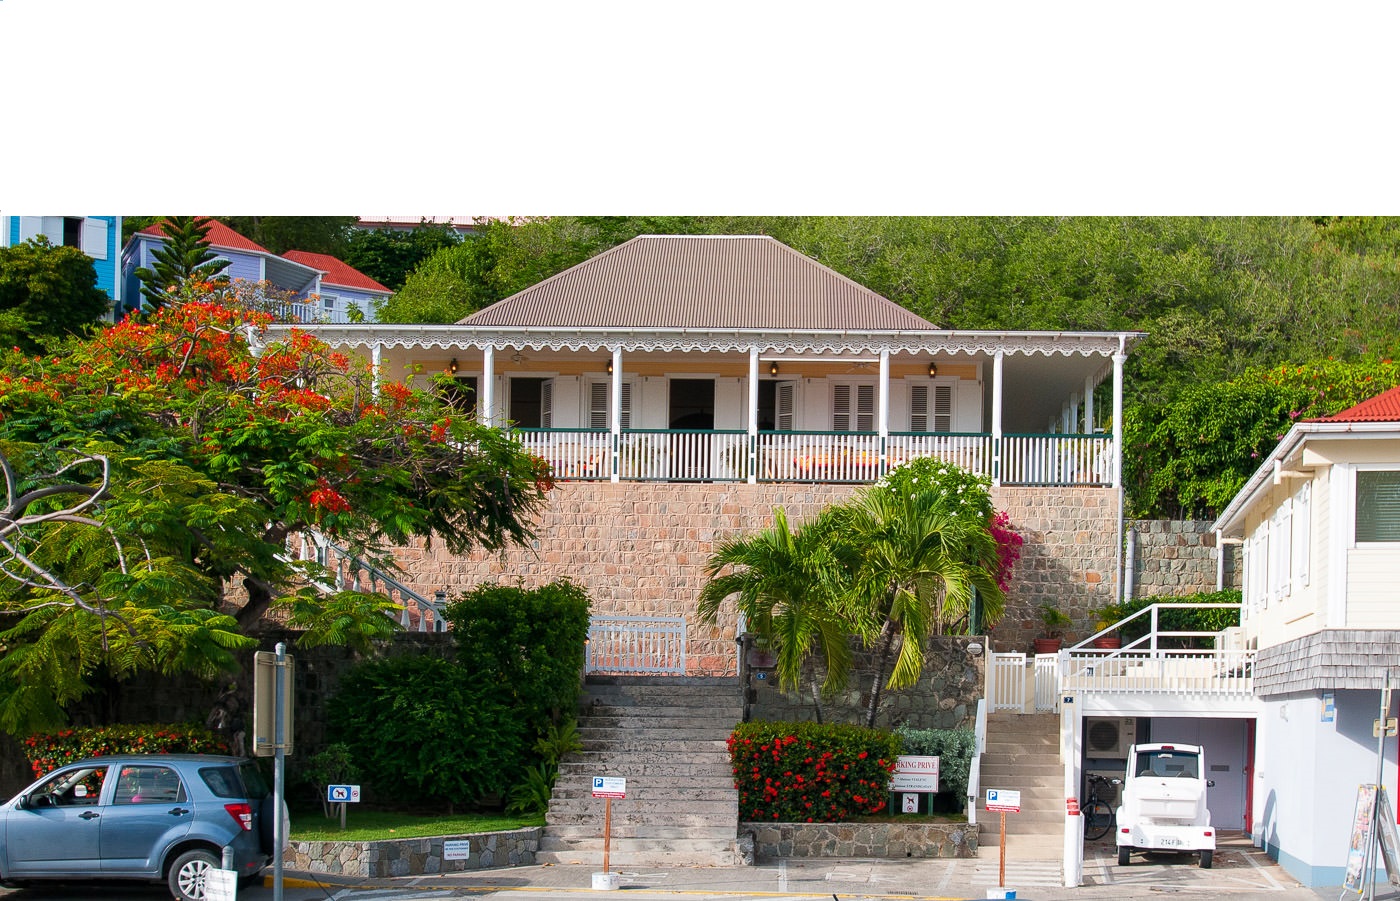 Villa Apartment Town House in St Barts, 3BR Rental